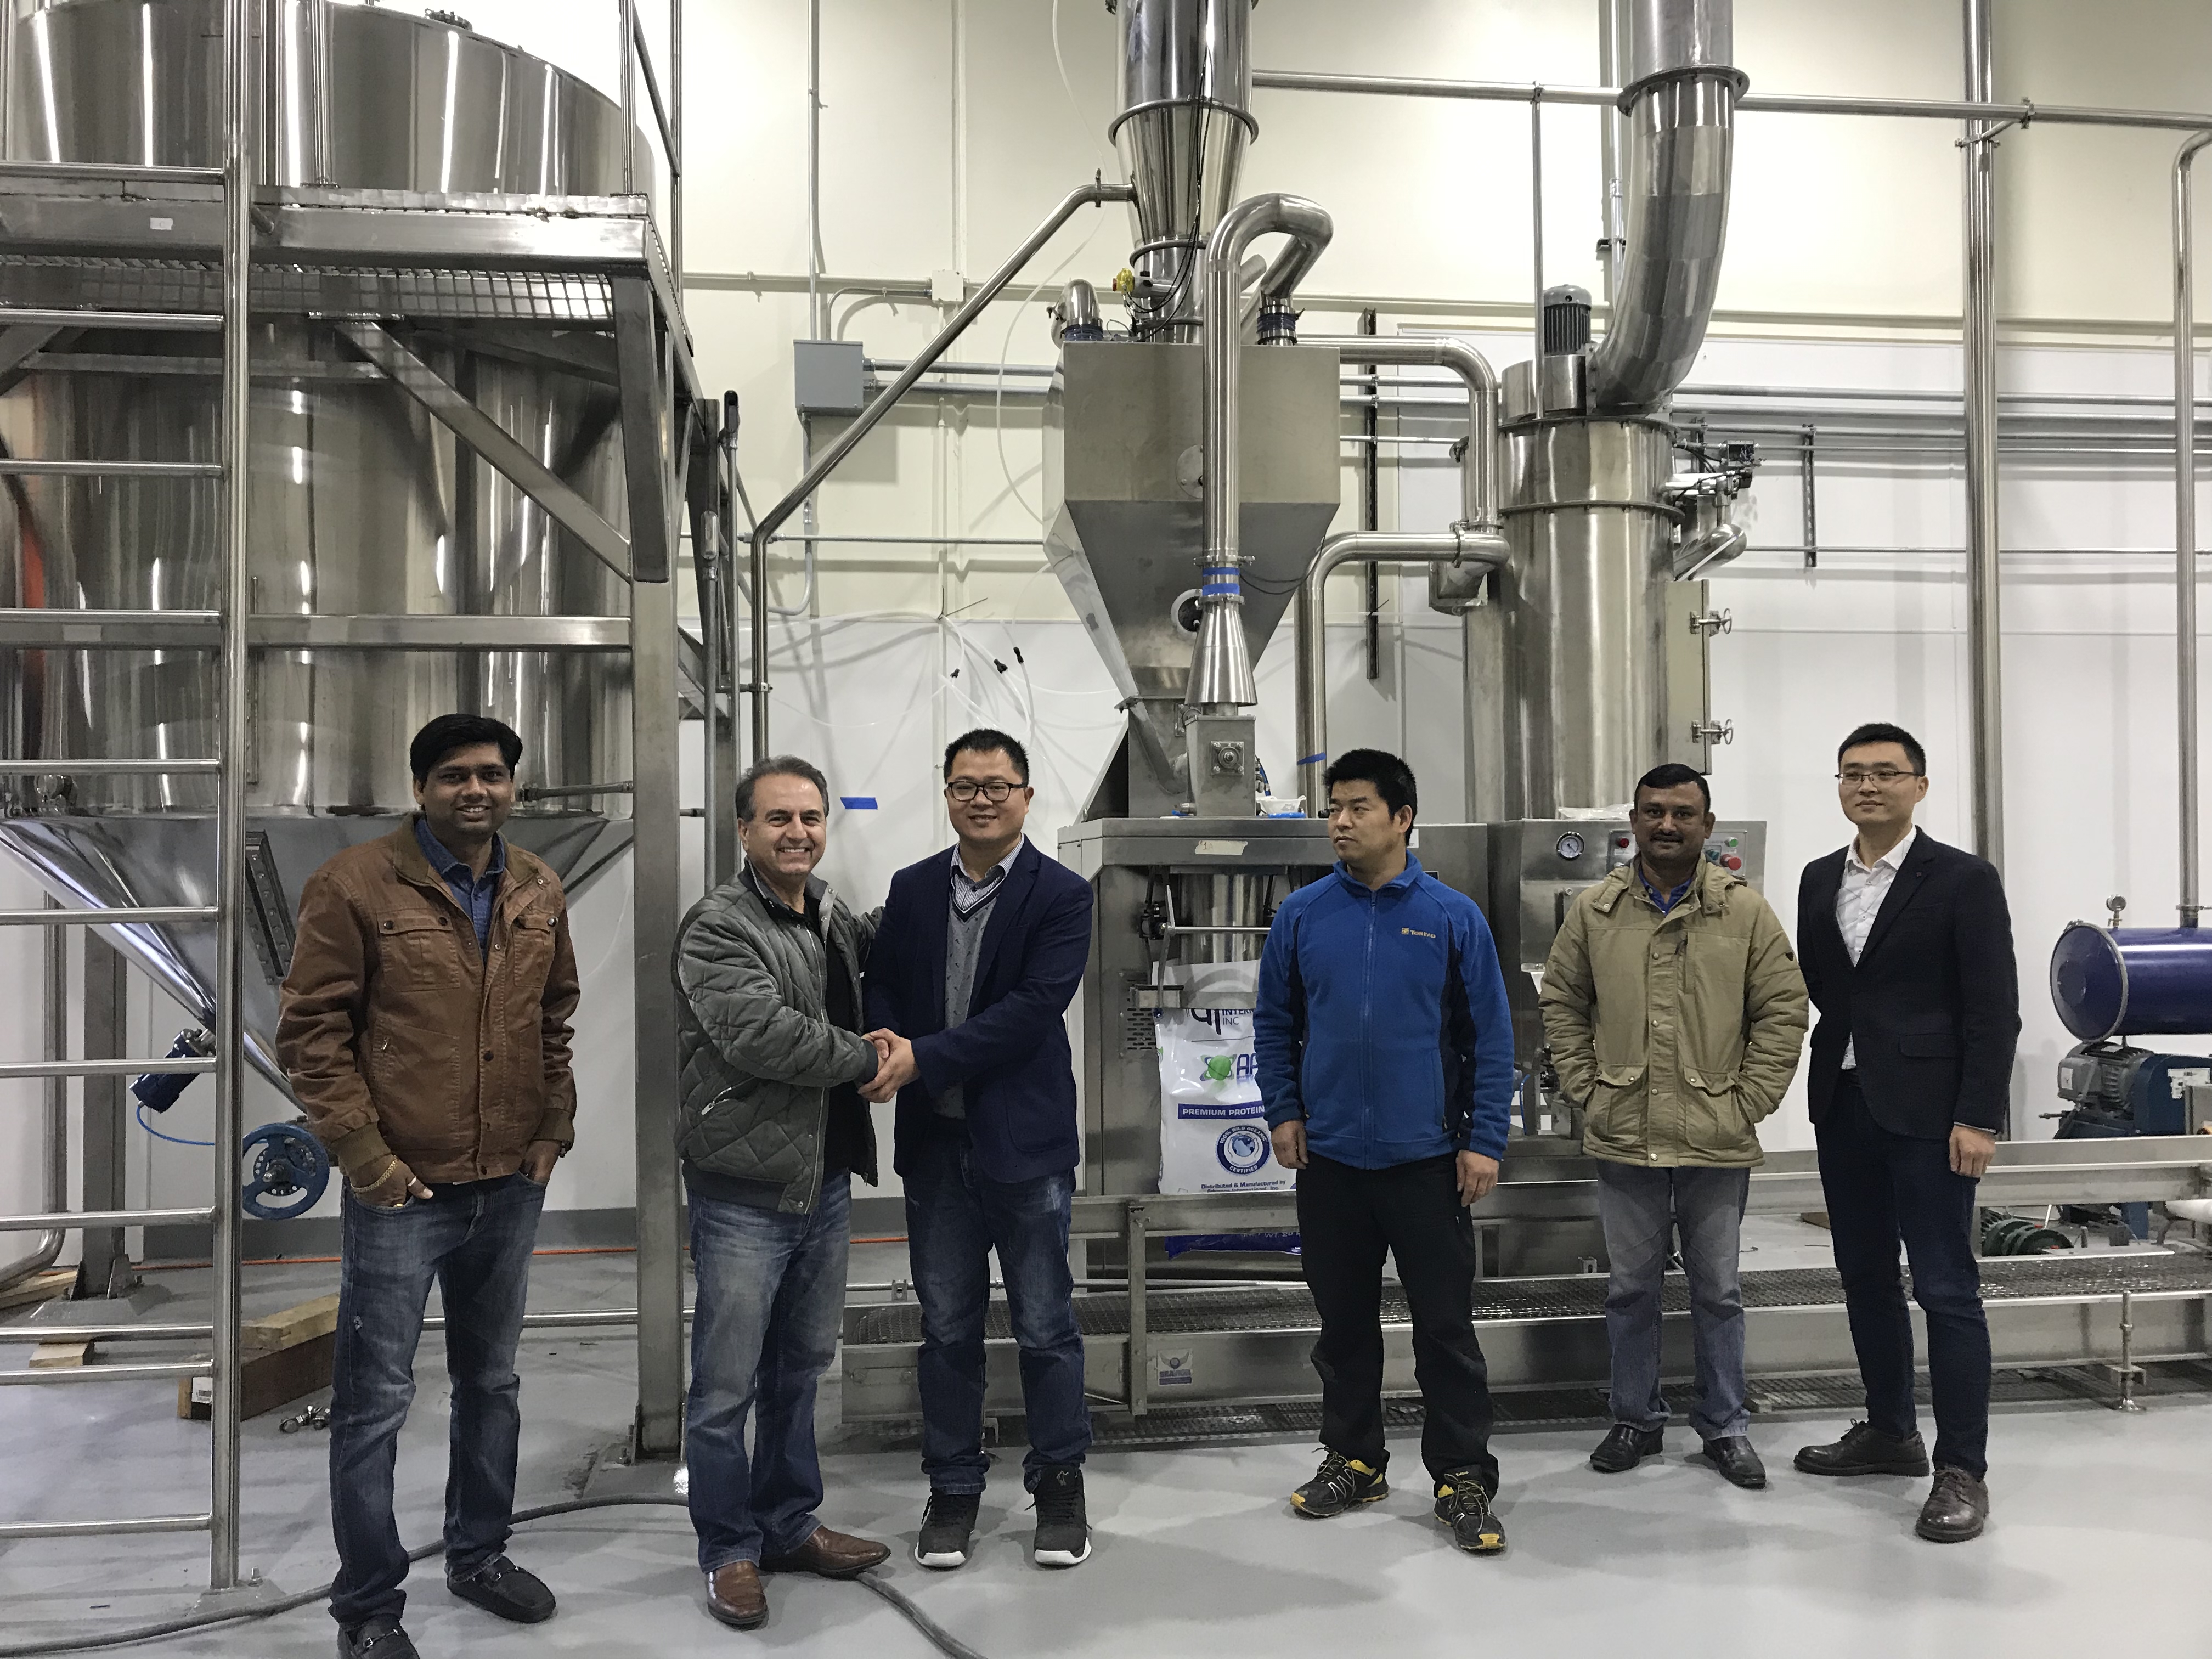 American protein powder fully automatic packaging line,无锡航一机械有限公司,Fully Automatic bagging robot Palletizing Line,fully automatic American protein powder packaging line,无锡航一机械有限公司